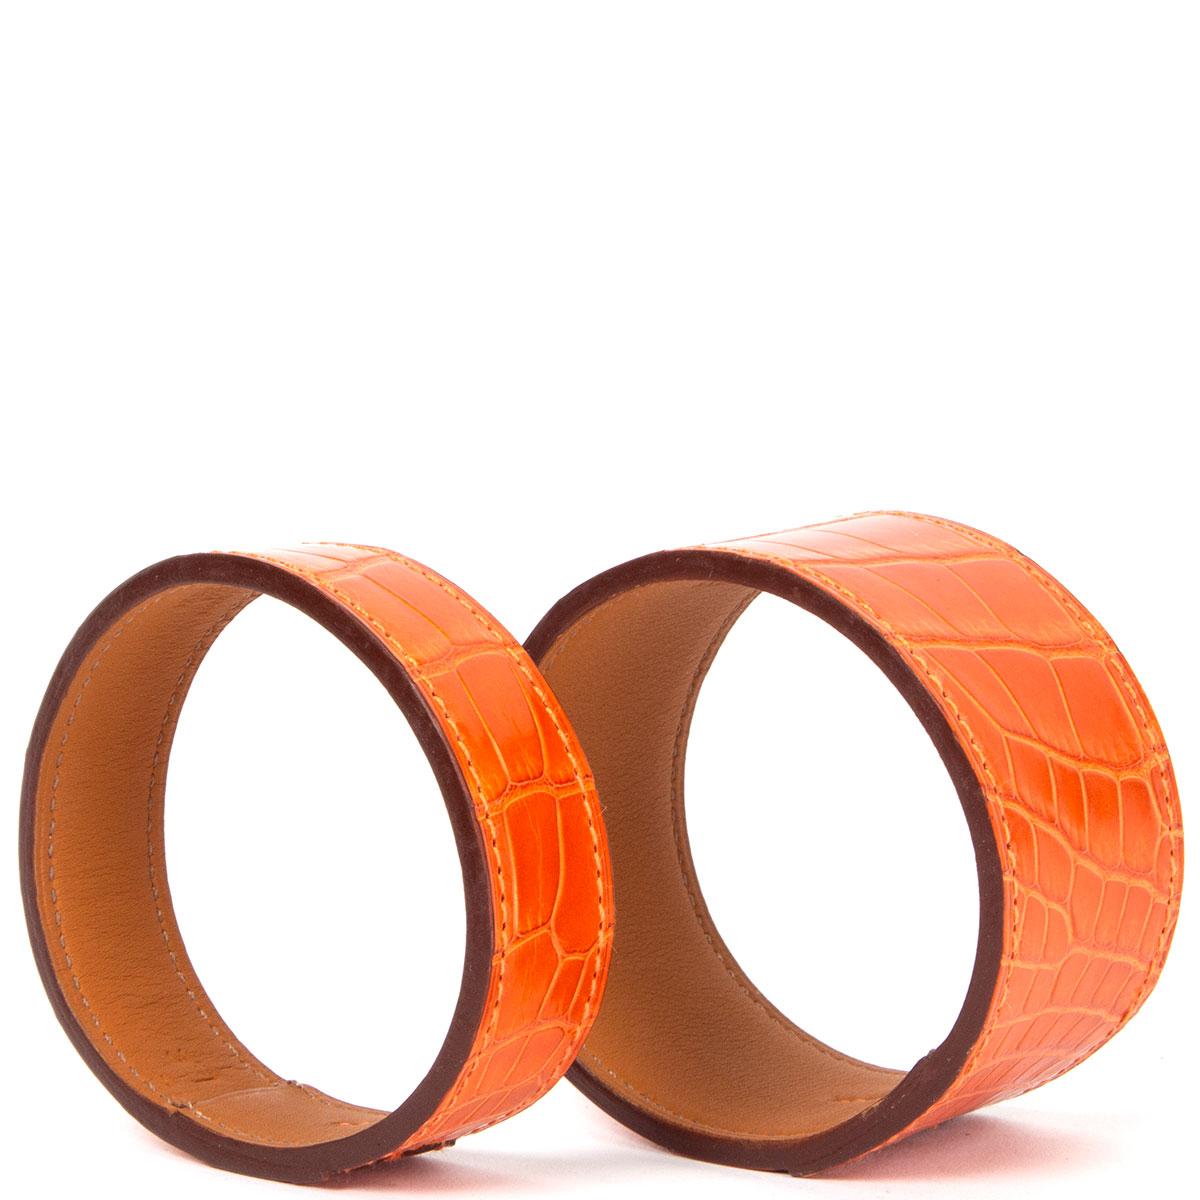 100% authentic Hermes 'Neo' bangles in orange shiny crocodile leather. Set of two sizes PM & GM. Have been worn and are in excellent condition. Come with box. 

Measurements
Tag Size	M
Circumference	19cm (7.4in)

All our listings include only the